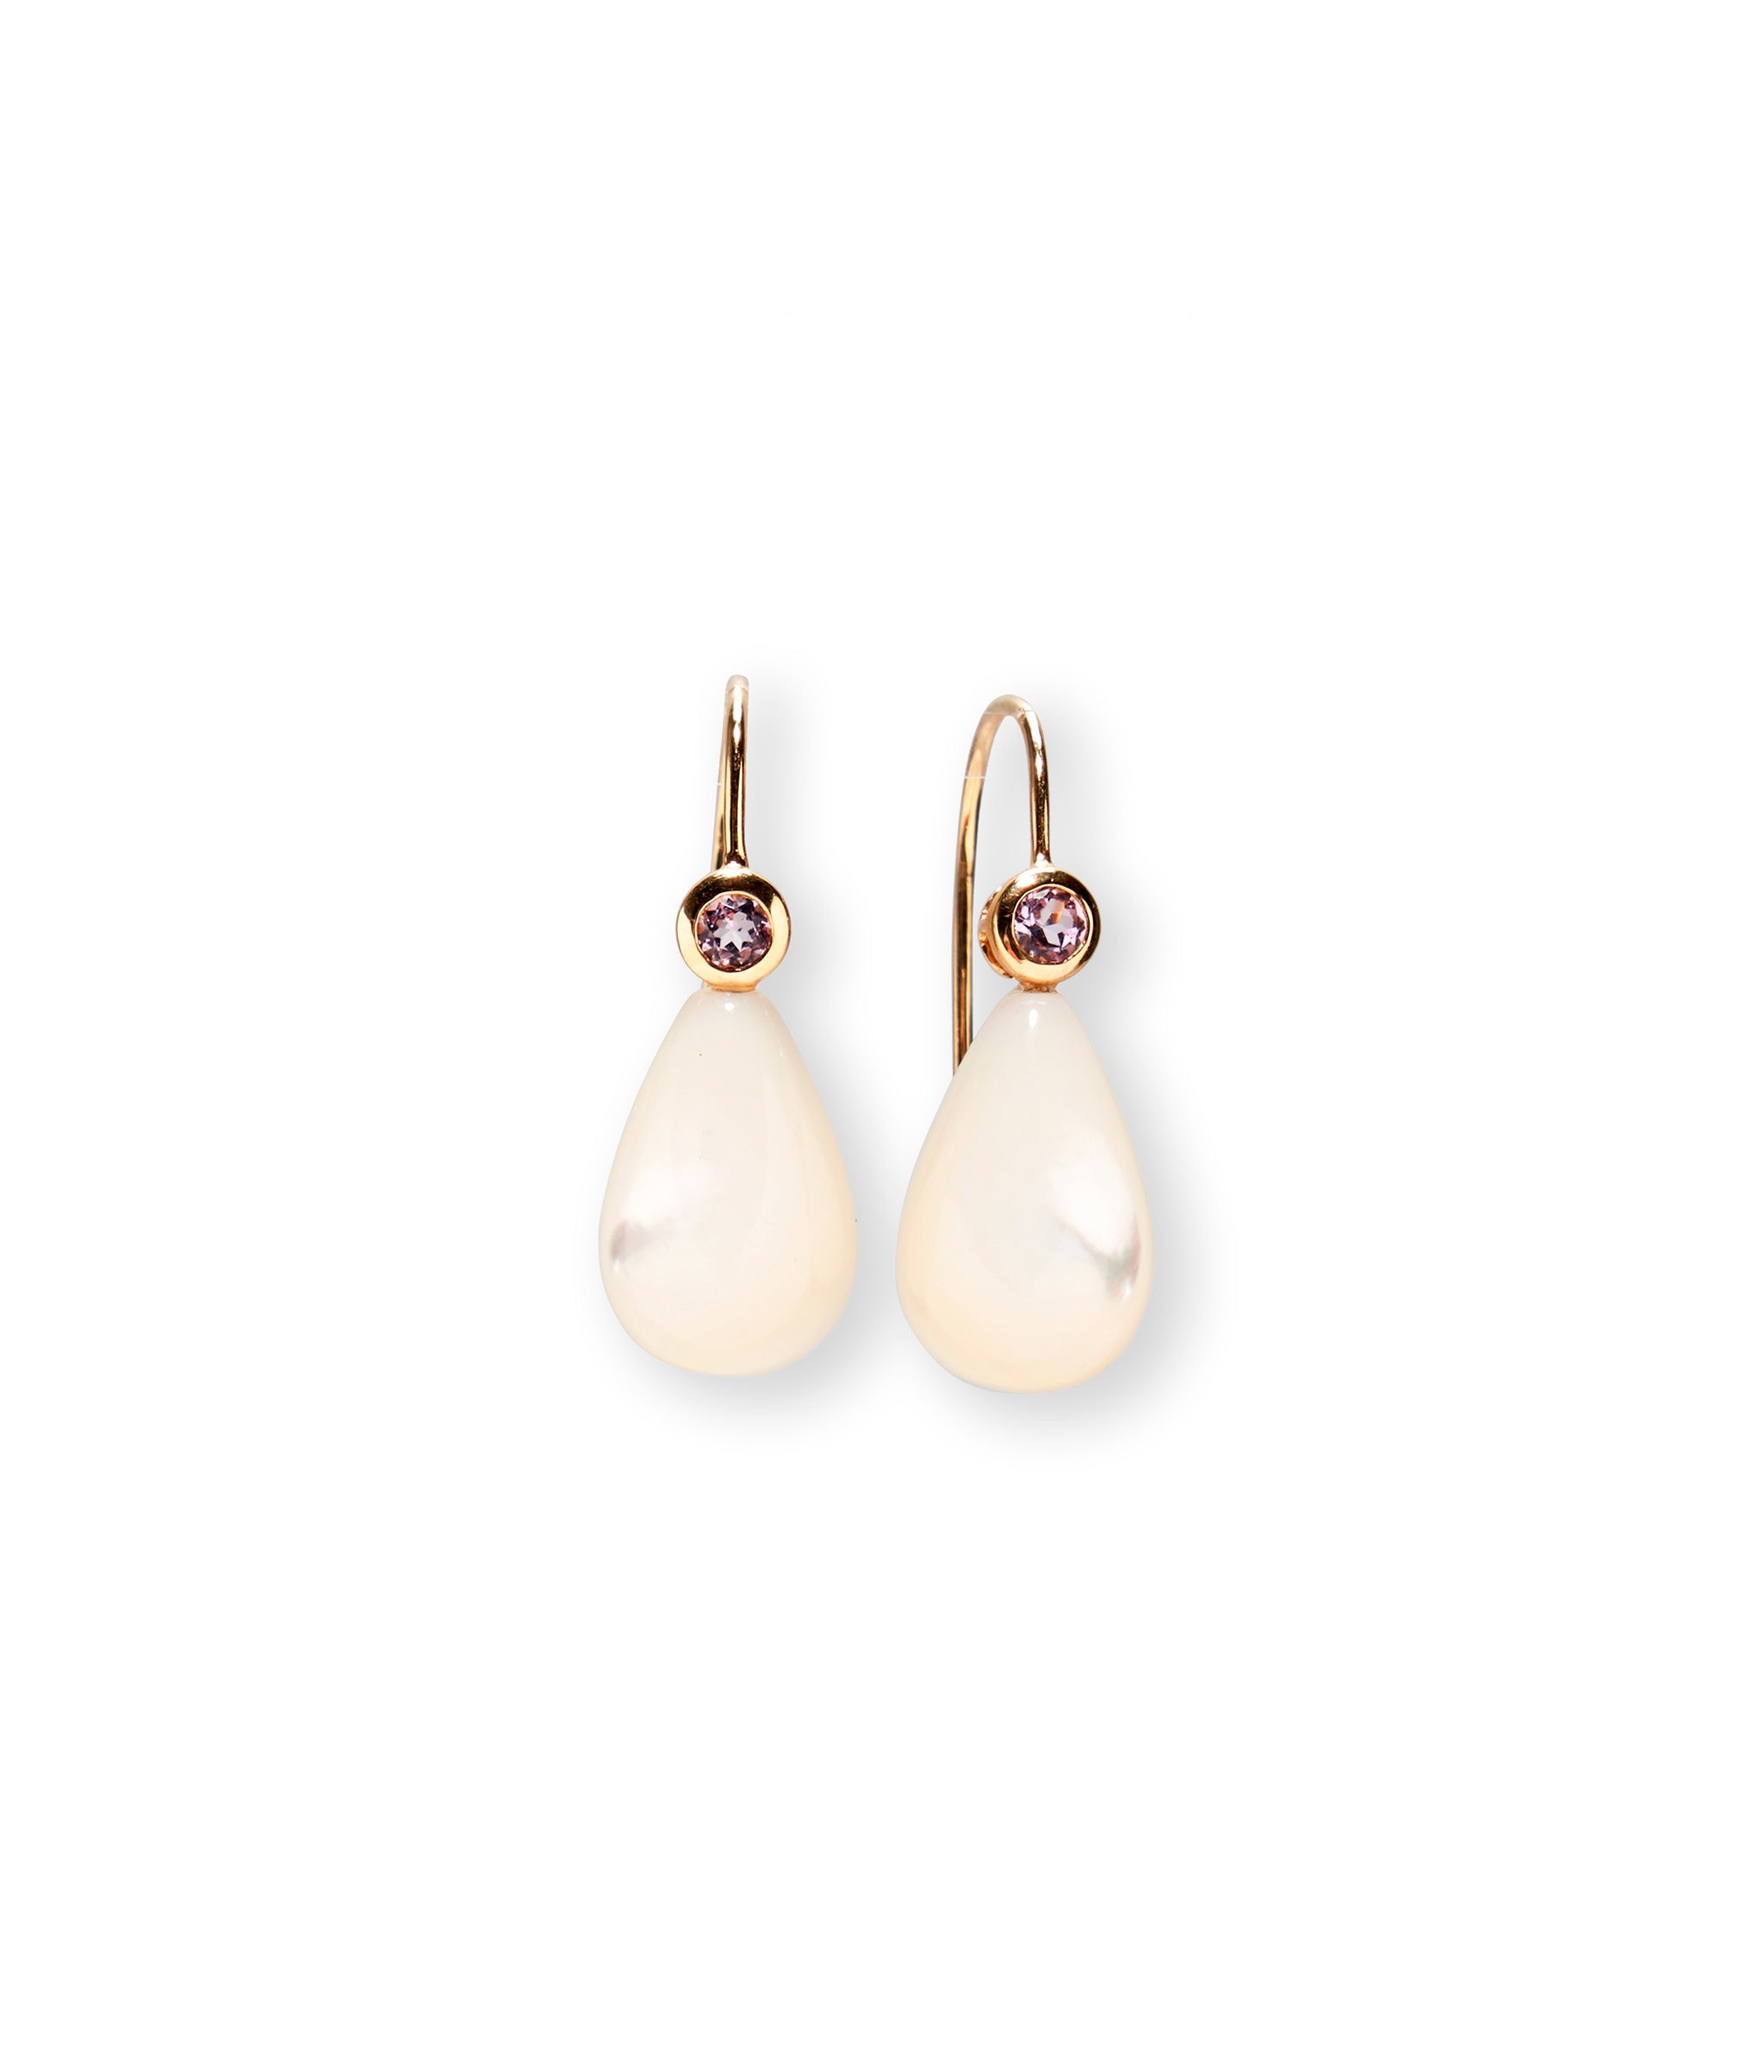 14k Gold Drop Earrings in Pink Amethyst & Pearl. Pink amethyst stone details and mother-of-pearl drops.